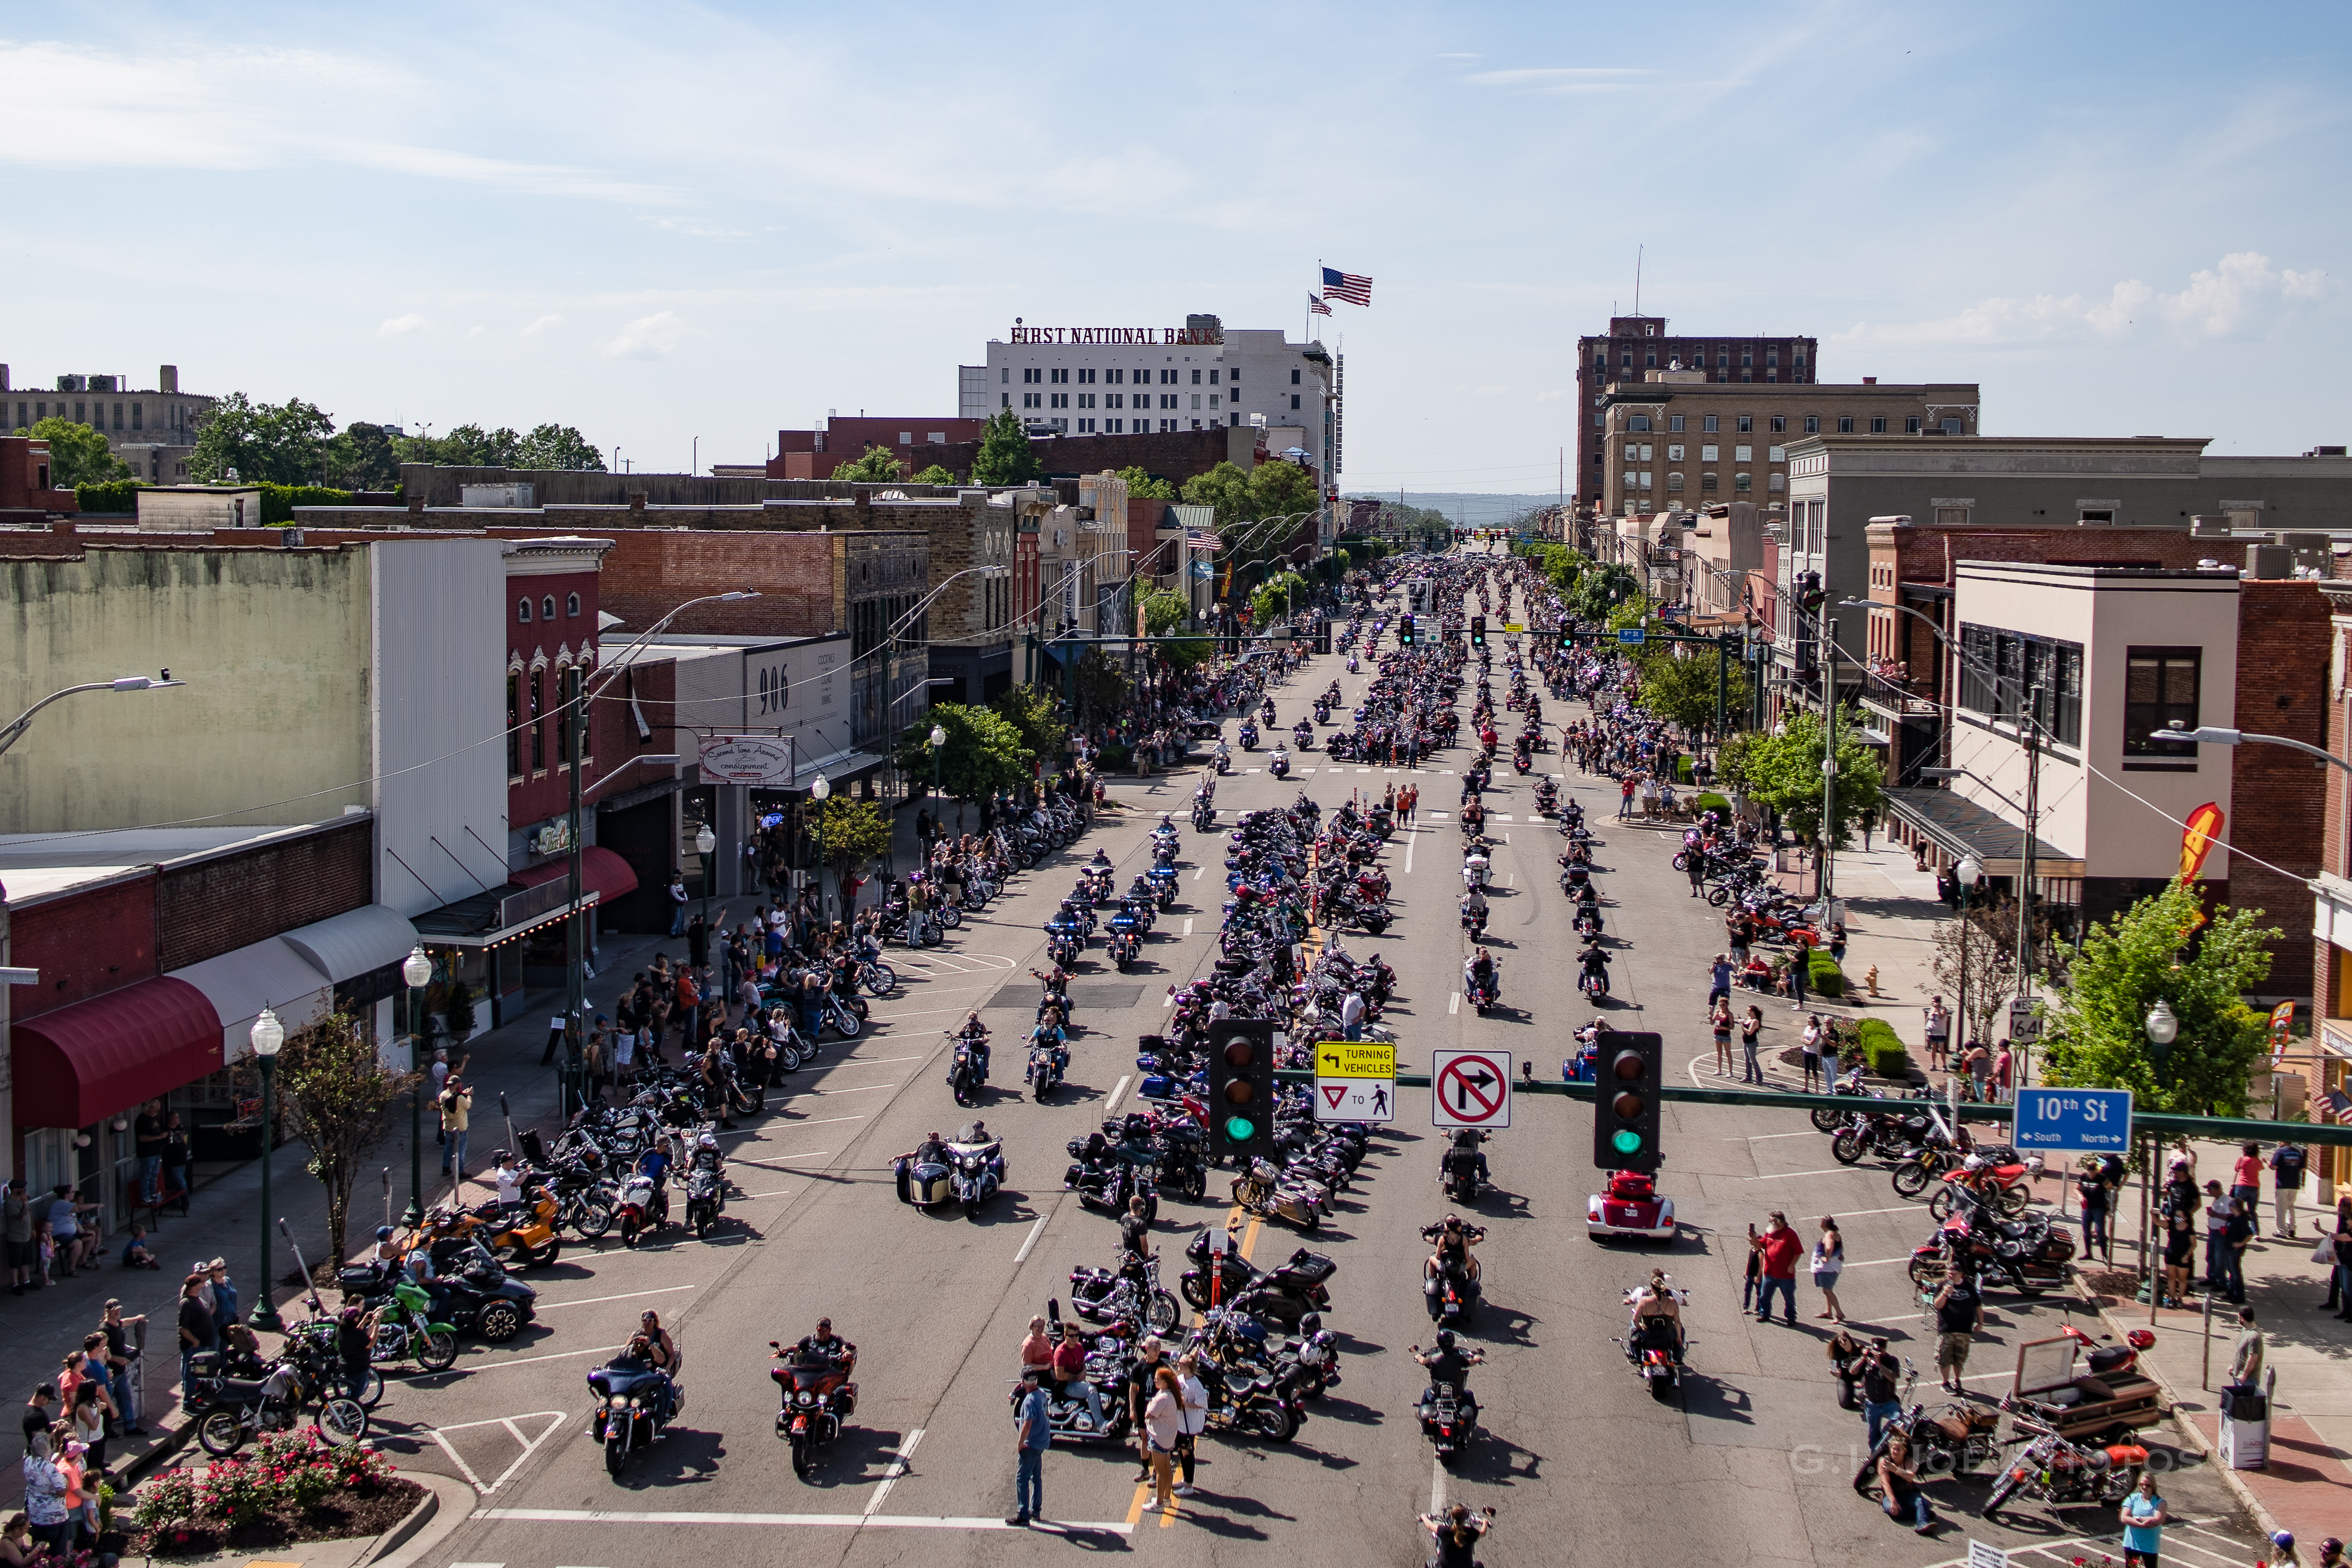 Thunder Through the Valley Motorcycle Parade Group Photo